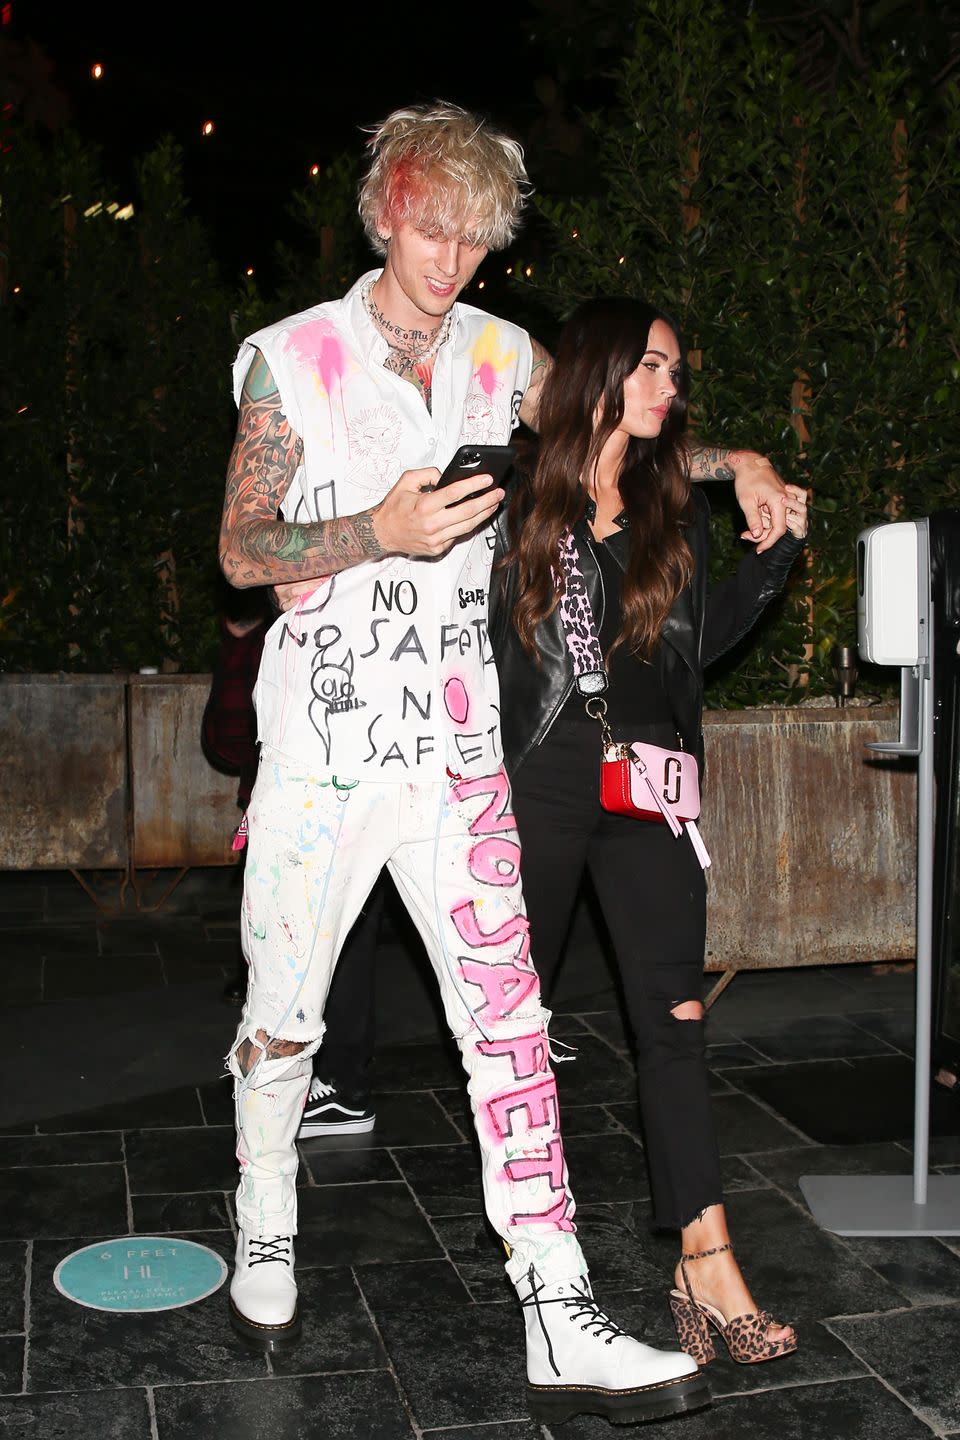 los angeles ca september 24 machine gun kelly and megan fox are seen leaving a restaurant on september 24, 2020 in los angeles, california photo by iamkevinwongcommegagc images